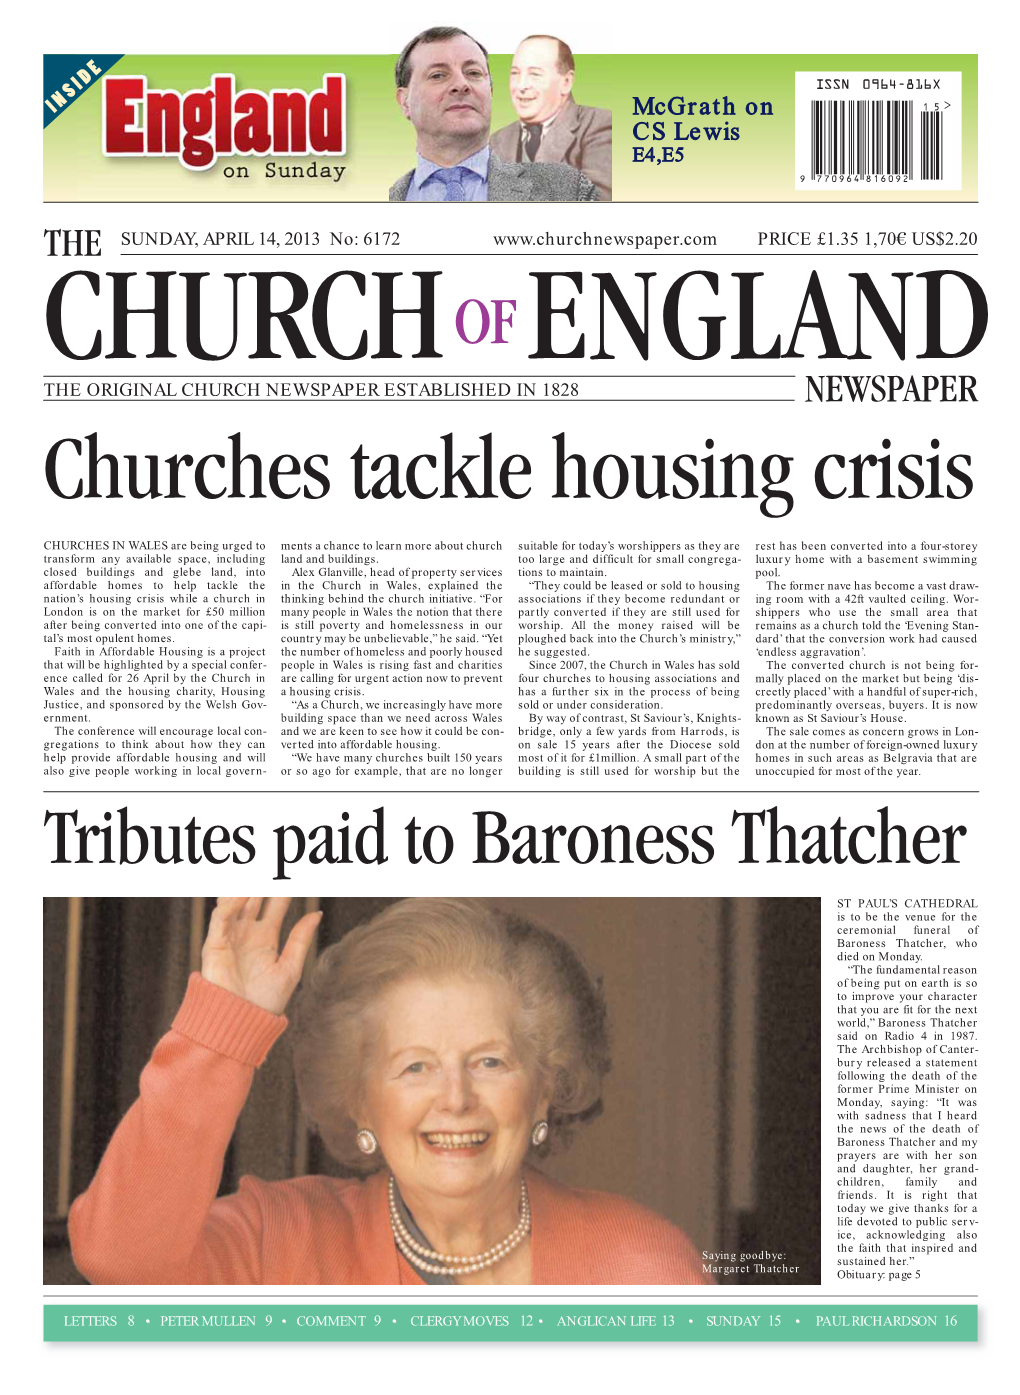 Tributes Paid to Baroness Thatcher